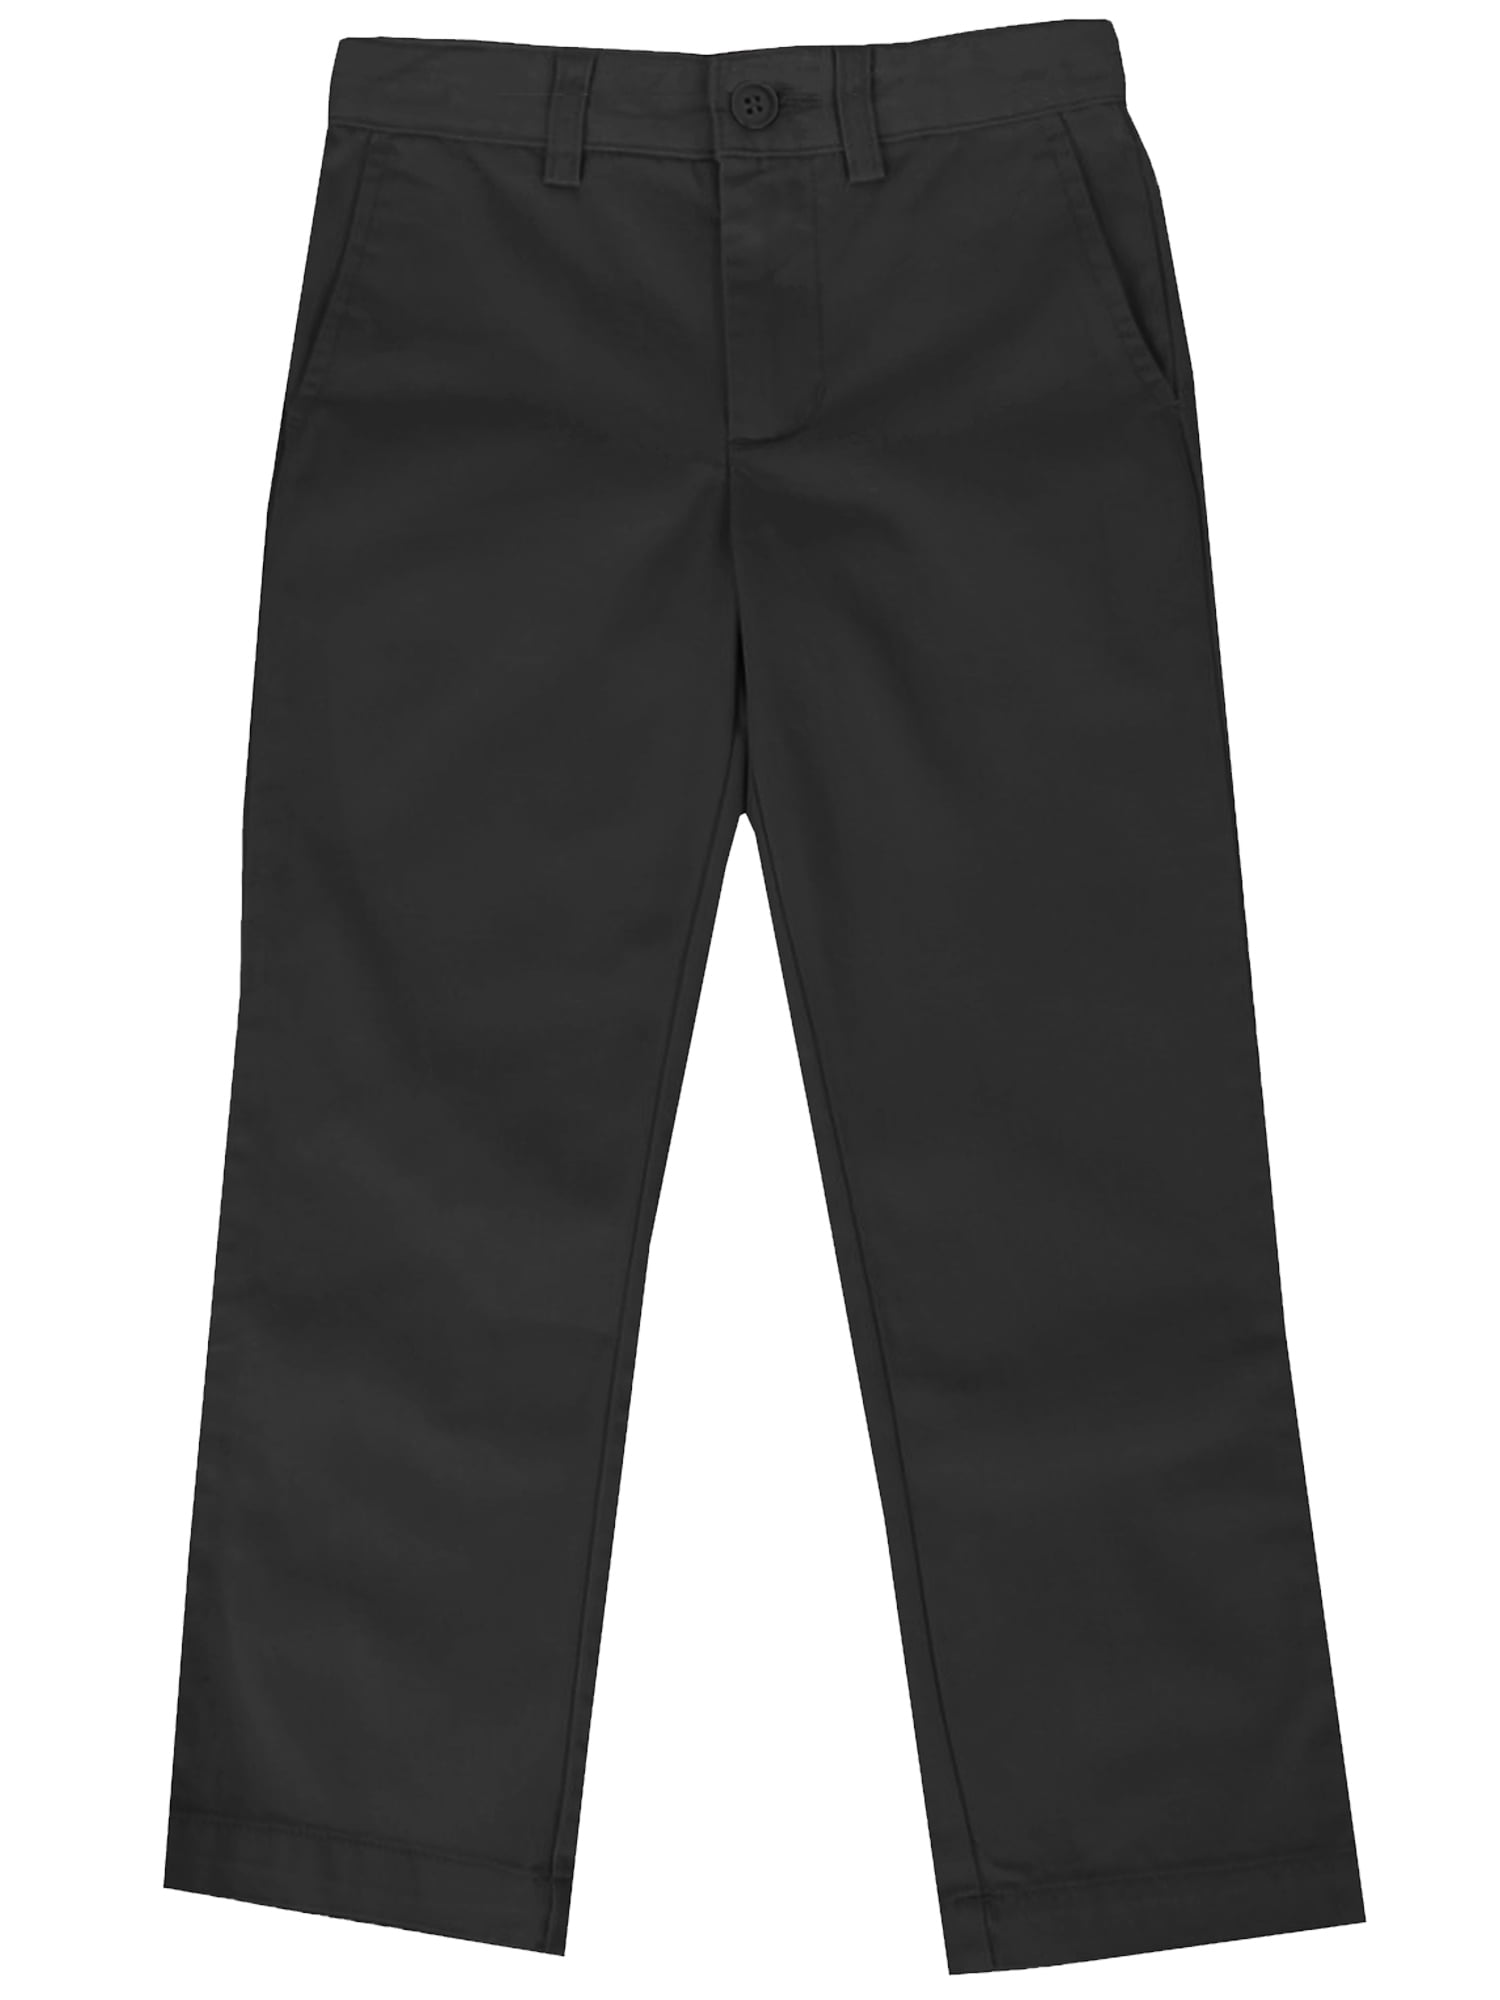 French Toast Boys School Uniform Pull-On Relaxed Fit Pants, Sizes